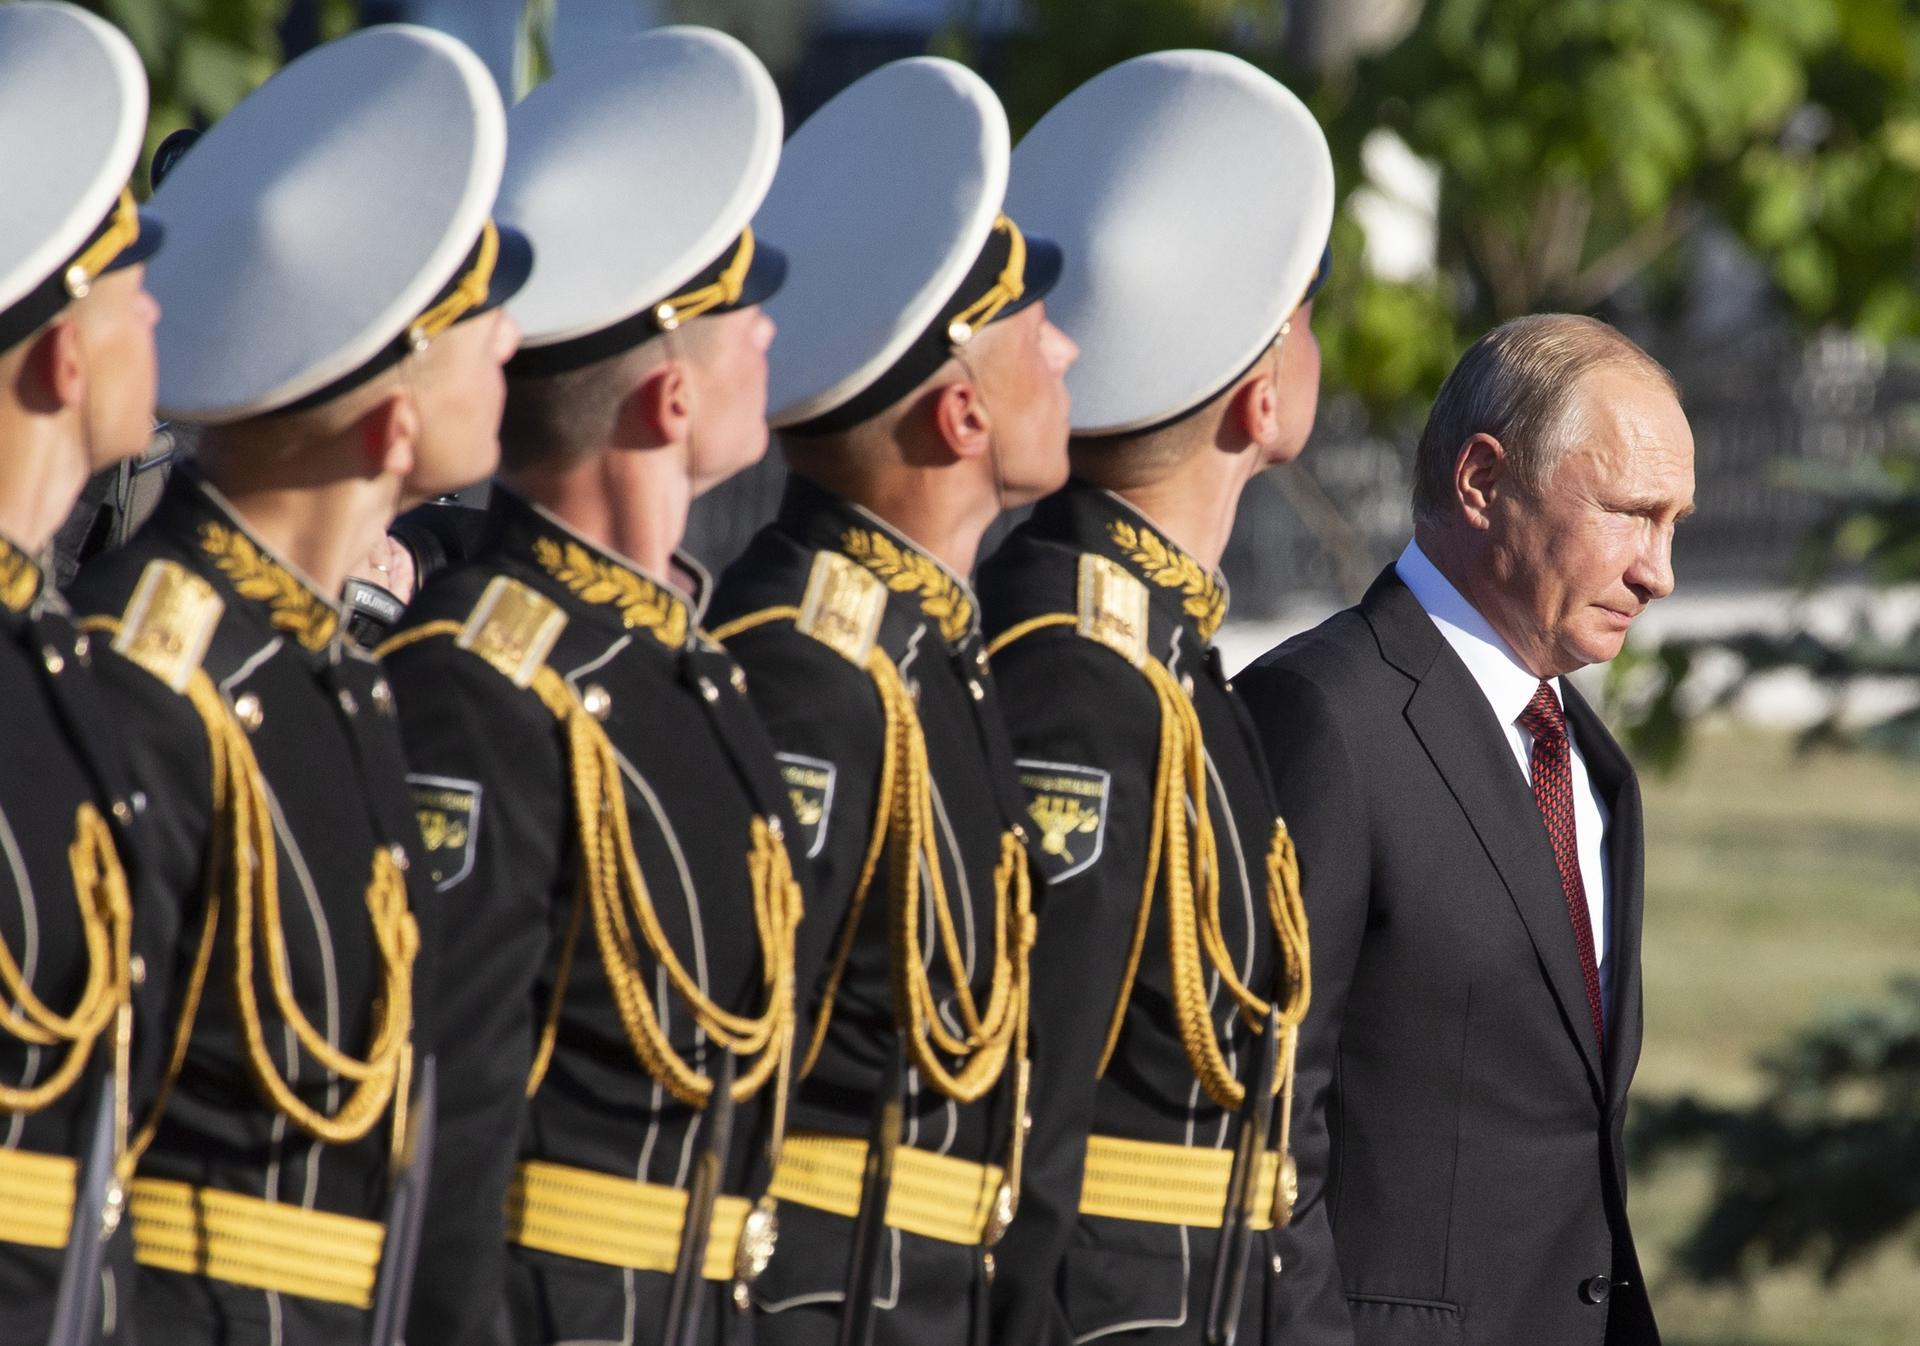 Putin with a line of soldiers behind him in uniform